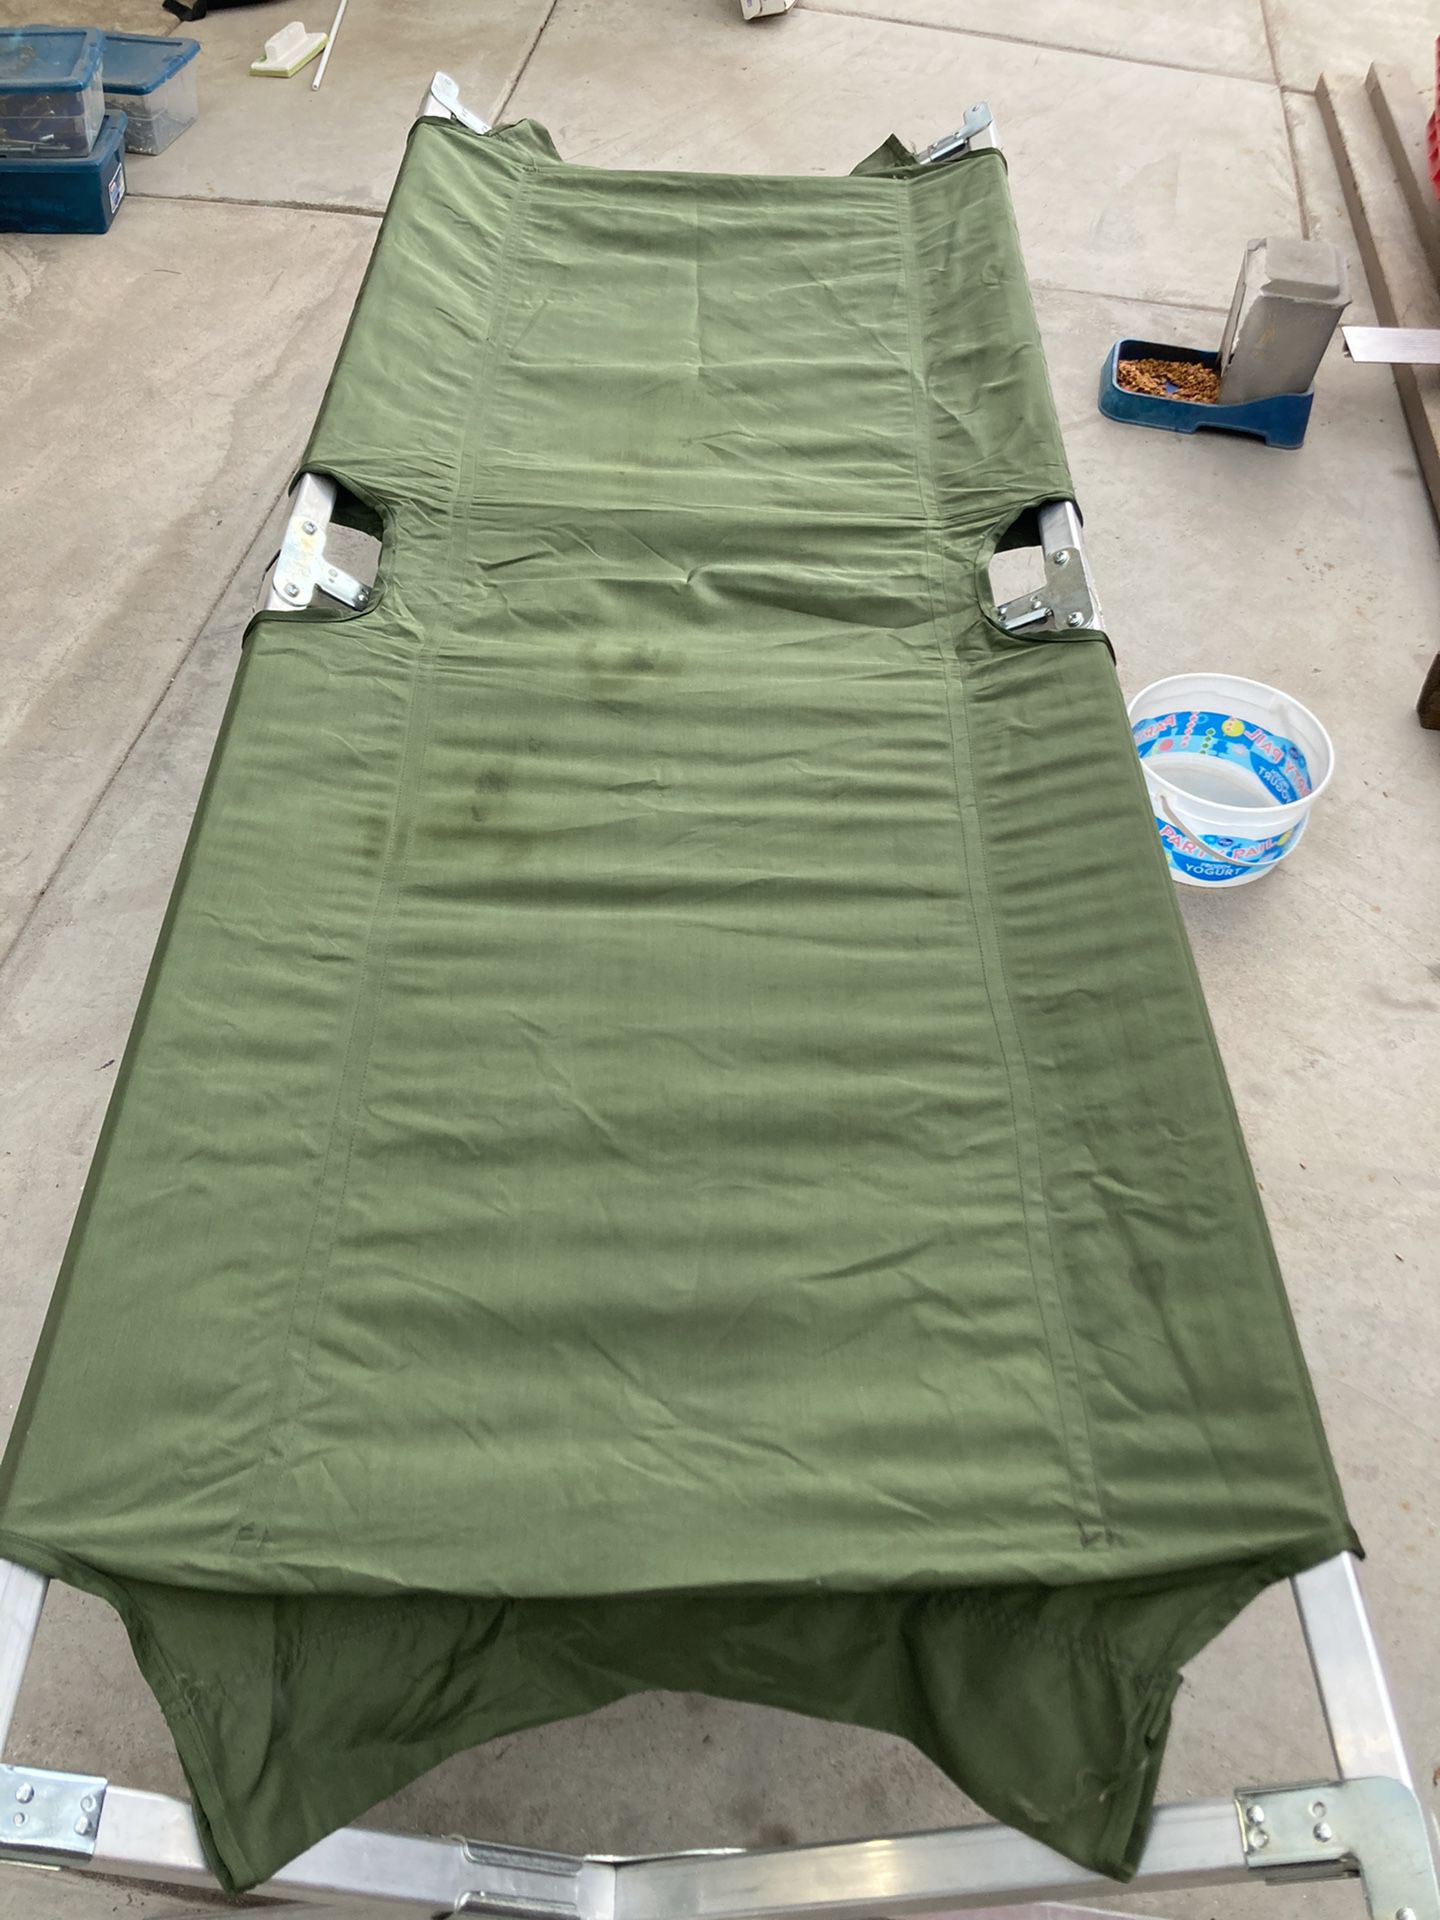 Real Army cot perfect condition